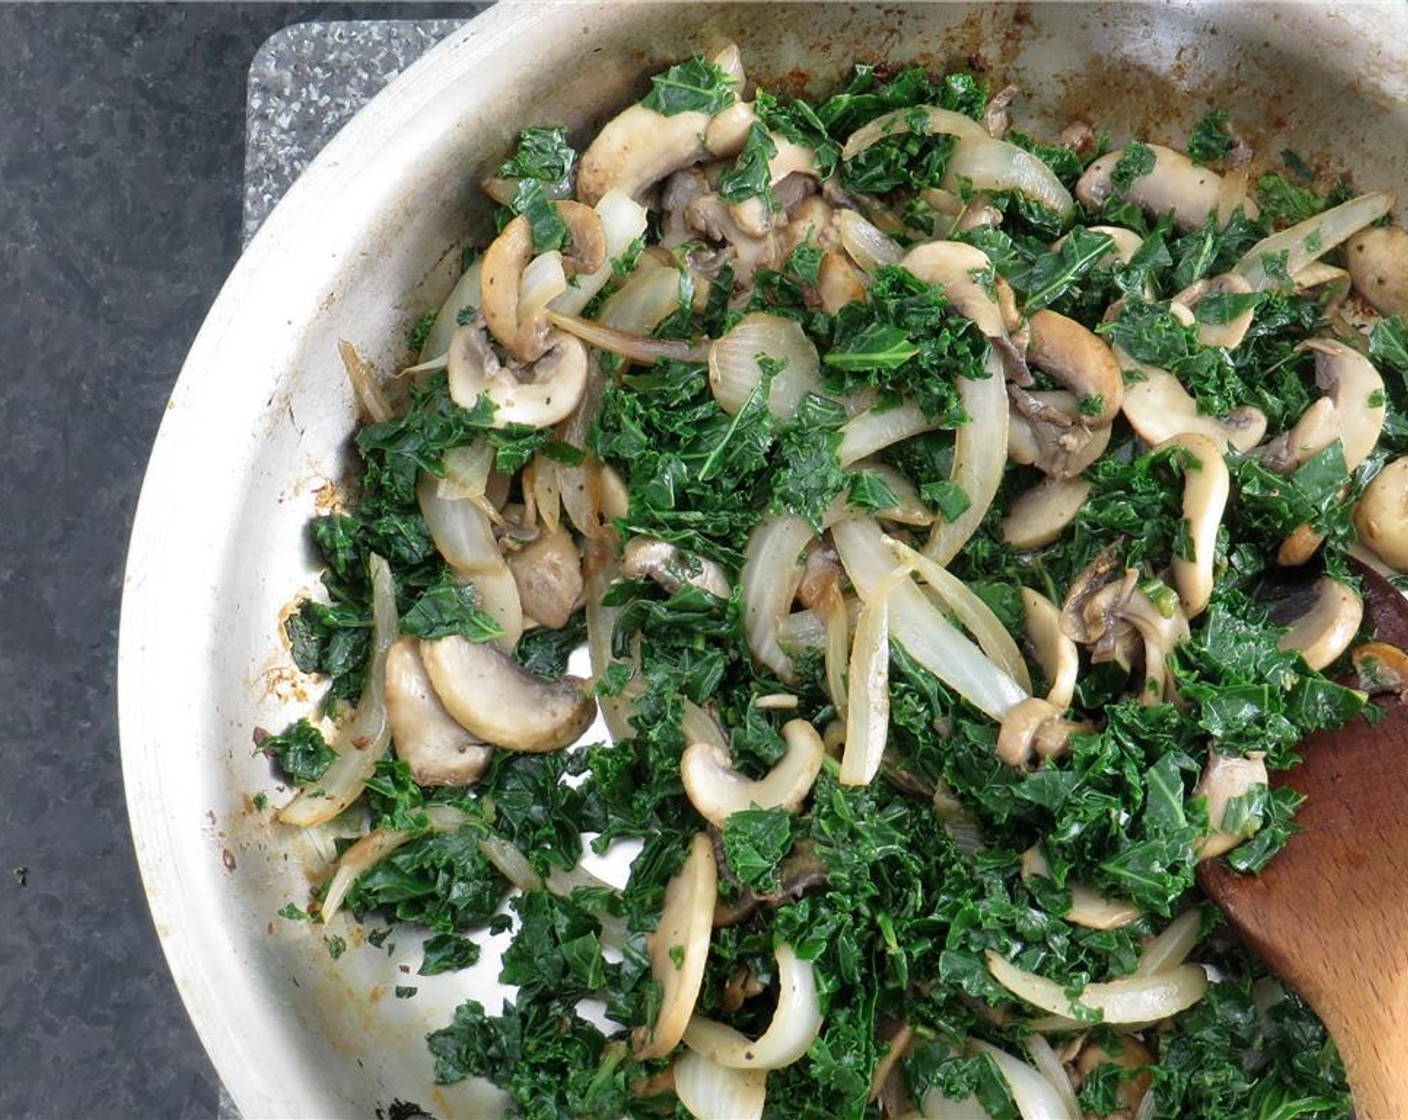 step 6 Add more Olive Oil (1 Tbsp) to the skillet, and add the Kale (3 cups). Cook 1 minute, stirring. Add Water (3 Tbsp) and cook until kale is wilted, and water has evaporated, stirring occasionally, 2-3 minutes. Add kale to onion mixture and set aside.